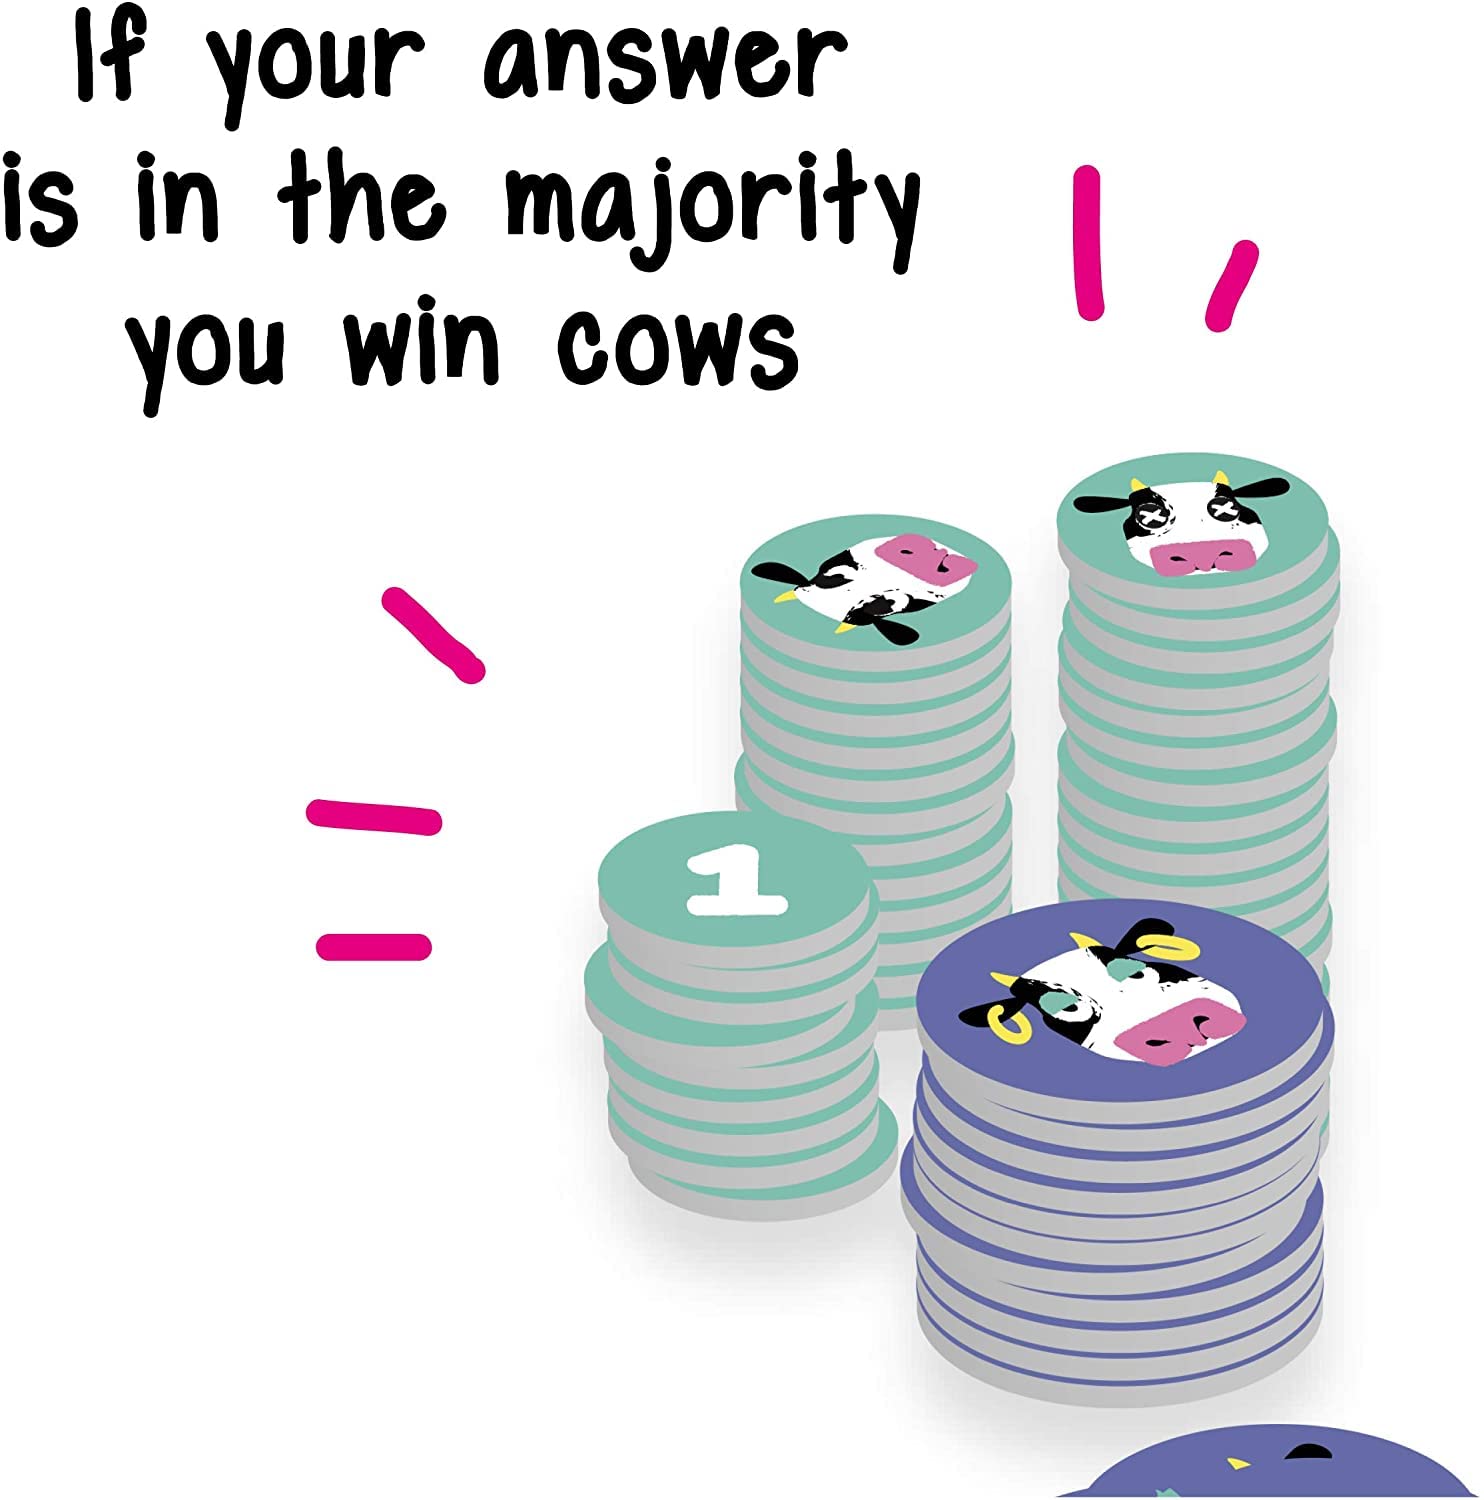 Herd Mentality: The Udderly Hilarious Party Game | Fun for The Whole Family